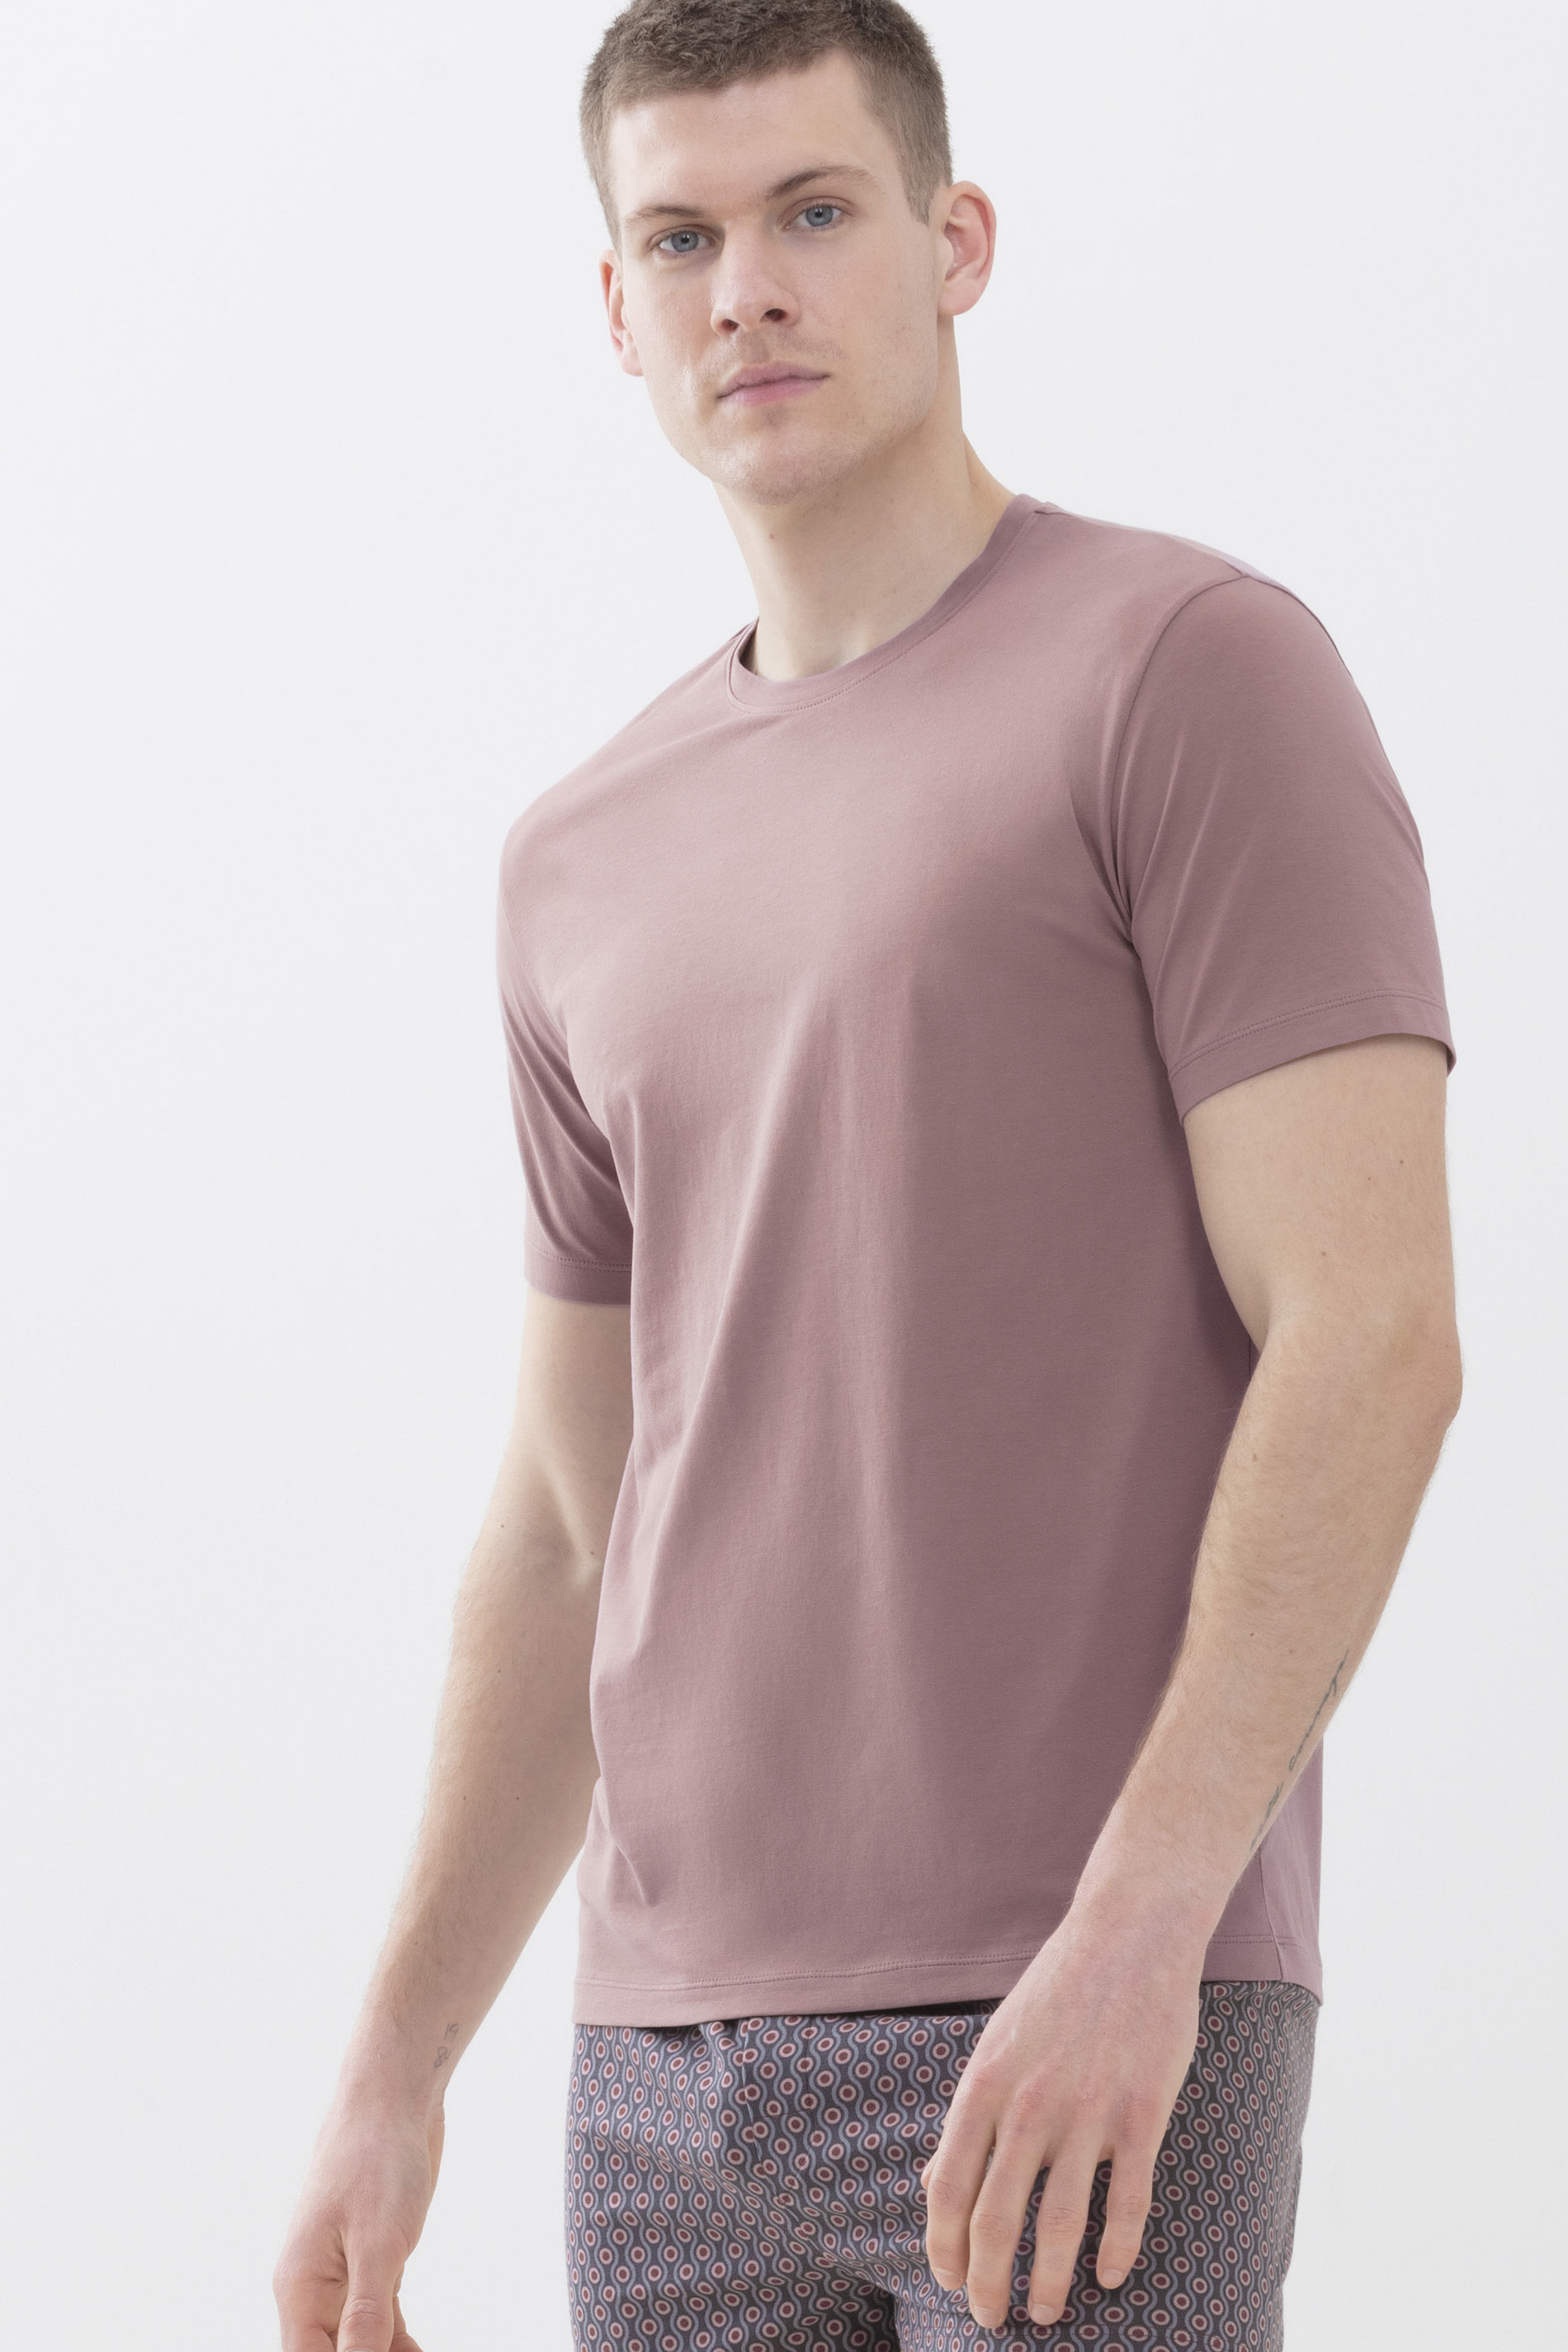 T-shirt Blush Powder Serie Relax Front View | mey®